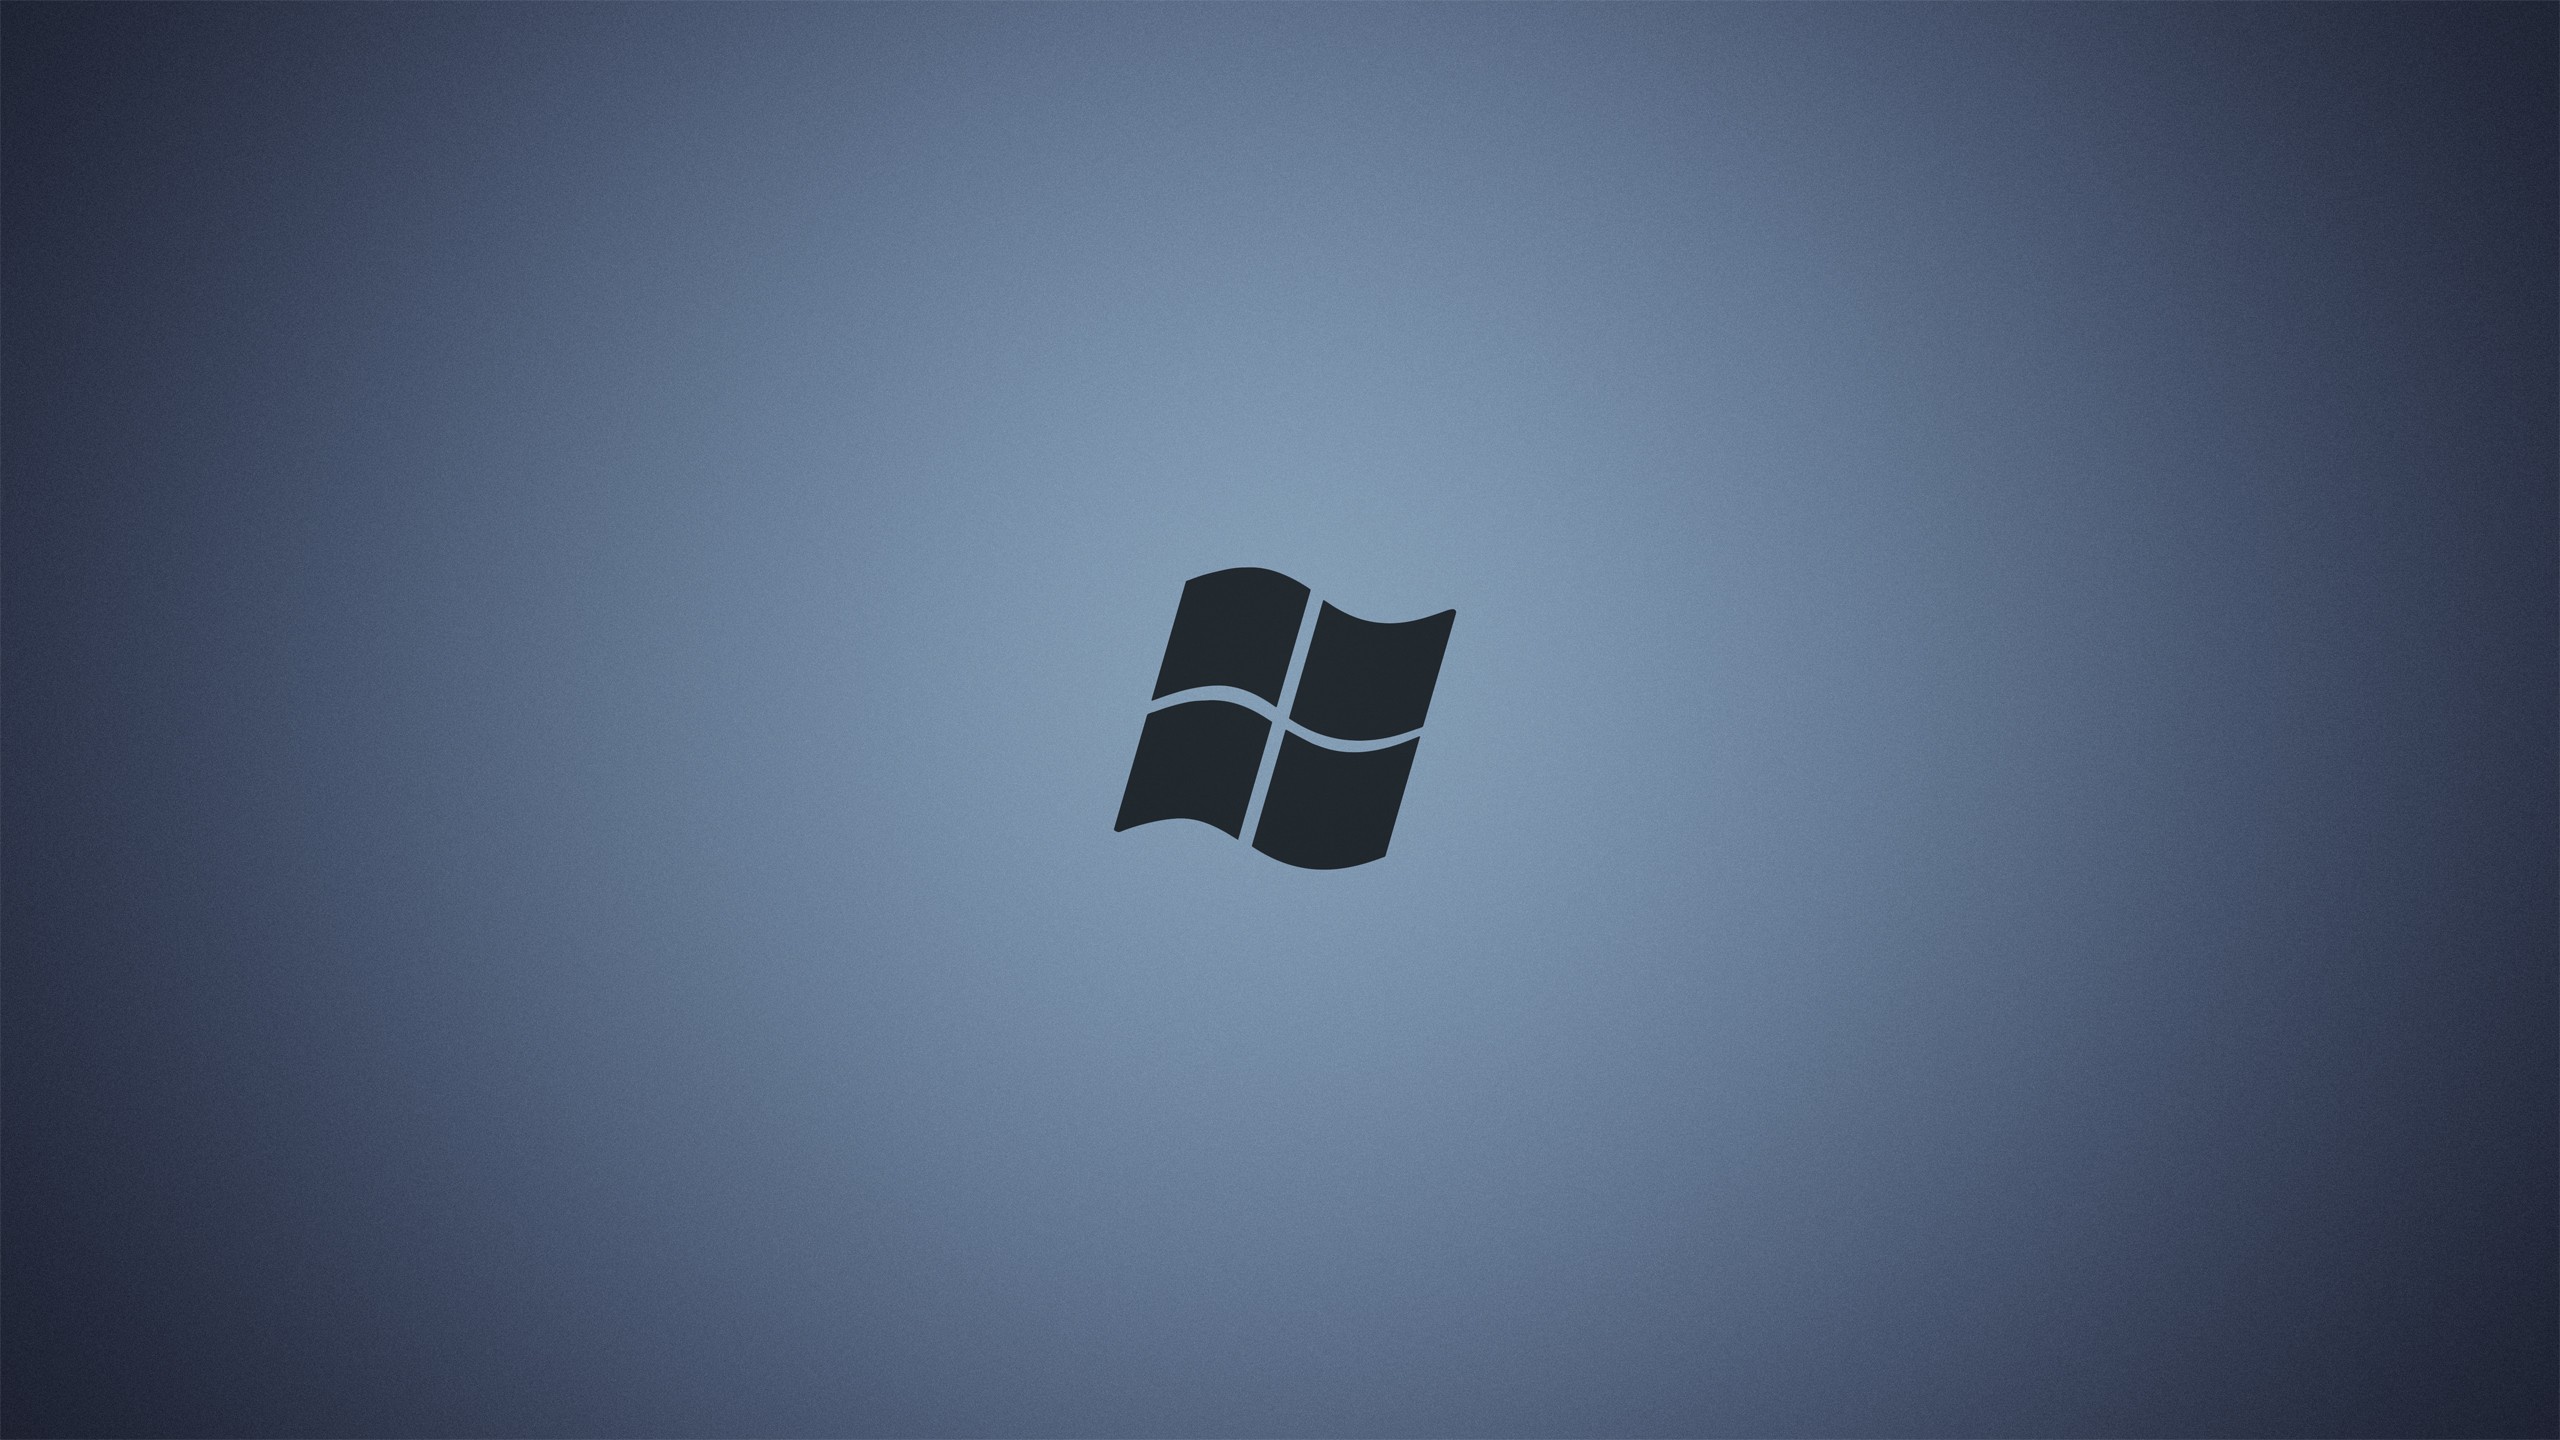 Windows 7, Minimalism Wallpapers HD / Desktop and Mobile Backgrounds